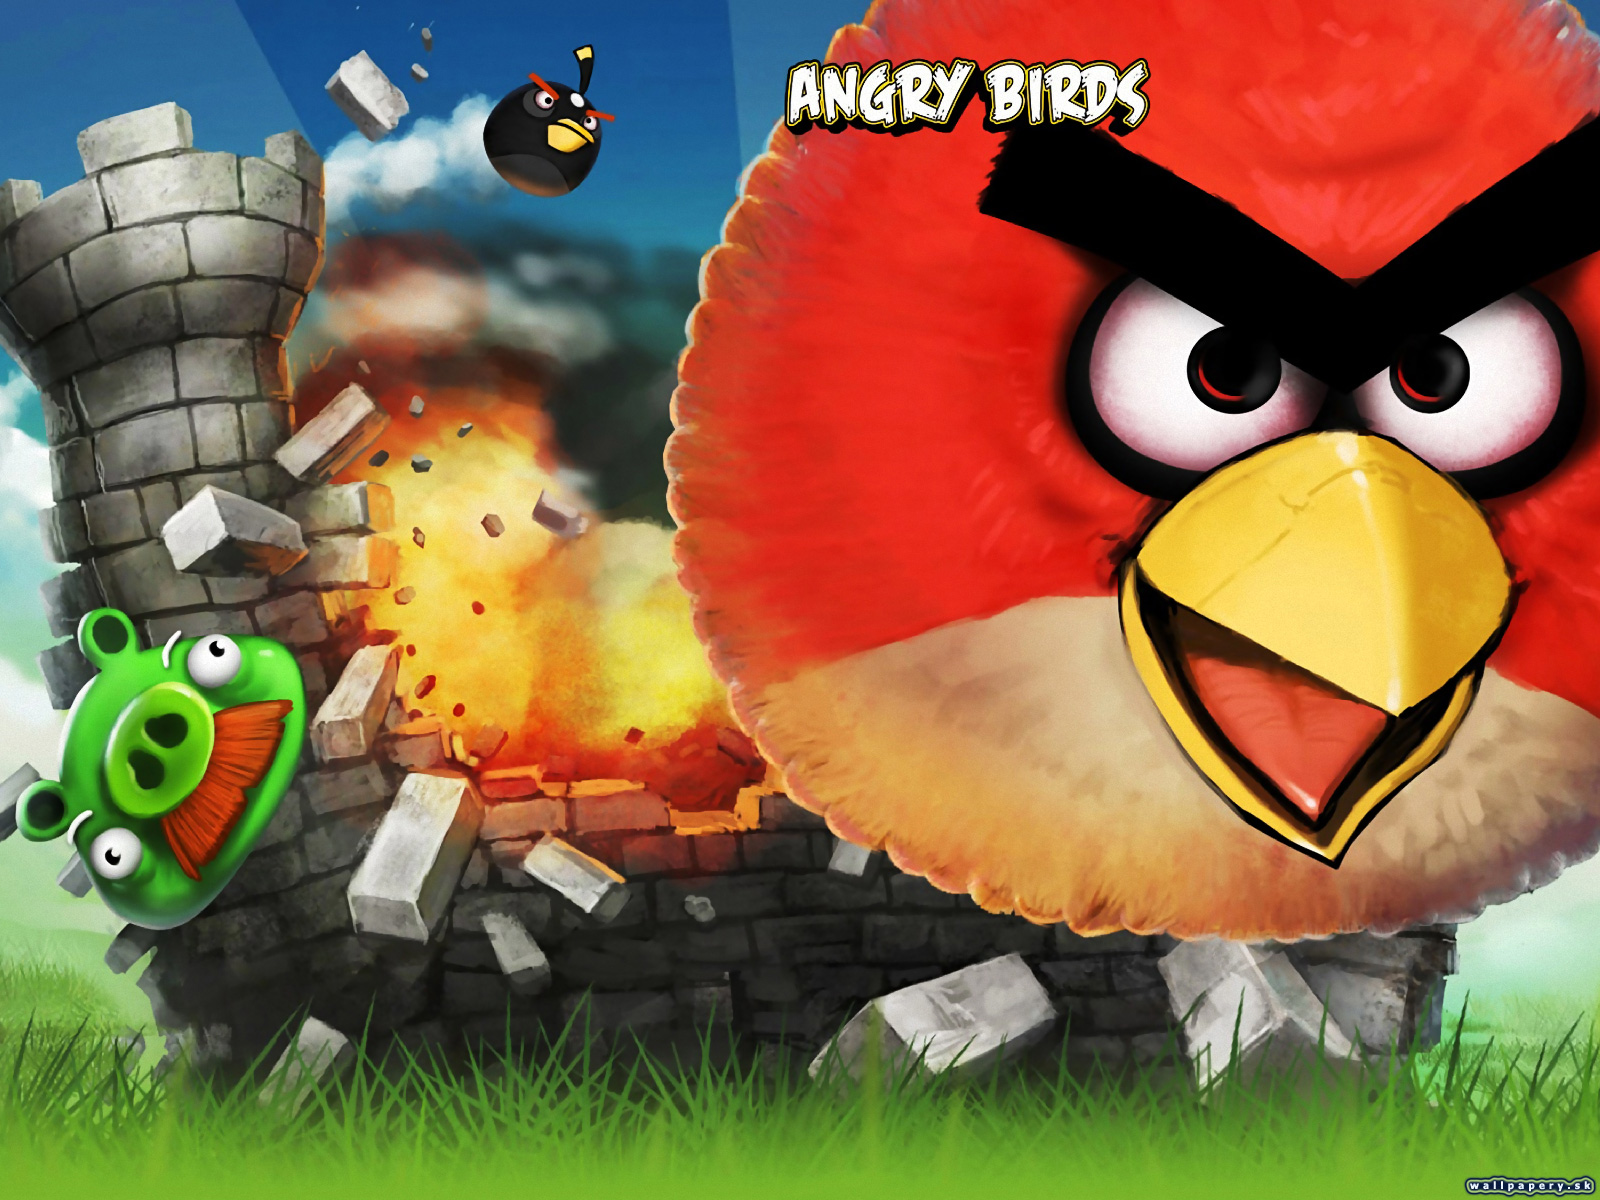 Angry Birds - wallpaper 1